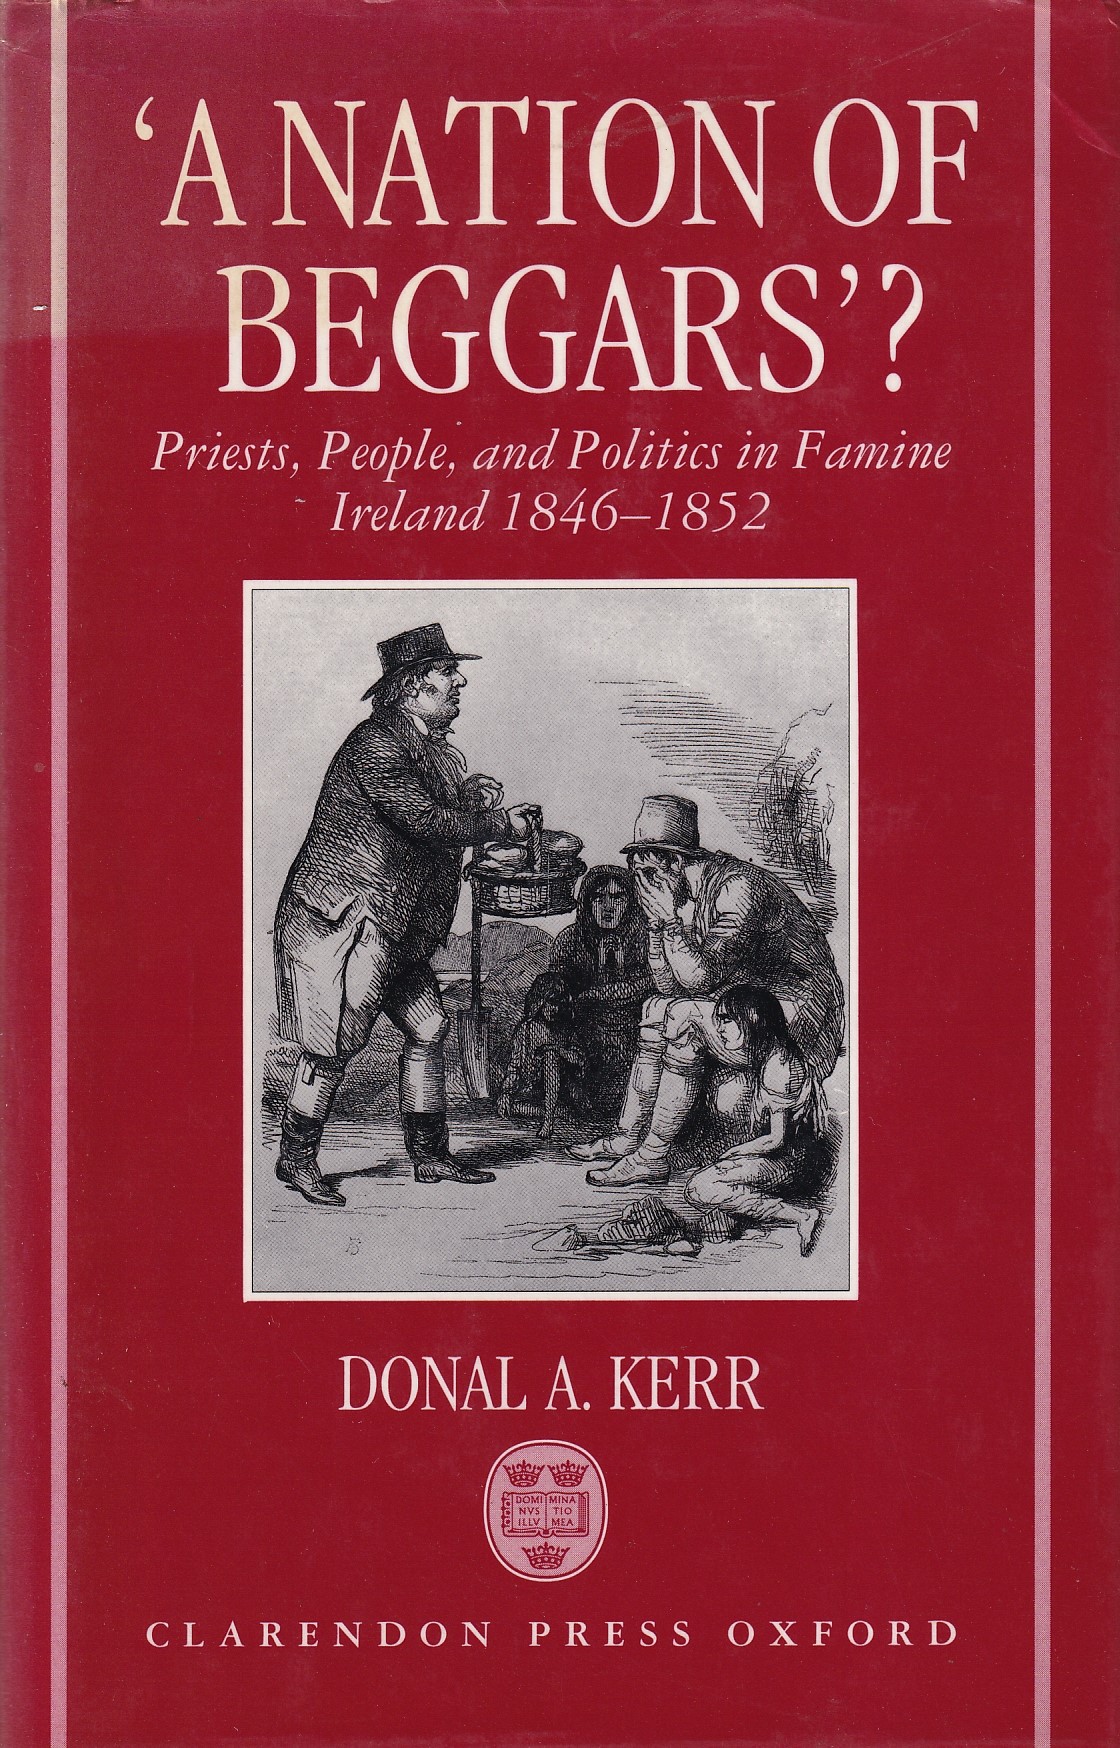 ‘A Nation of Beggars’?: Priests, People, and Politics in Famine Ireland, 1846-1852 | Donal A. Kerr | Charlie Byrne's